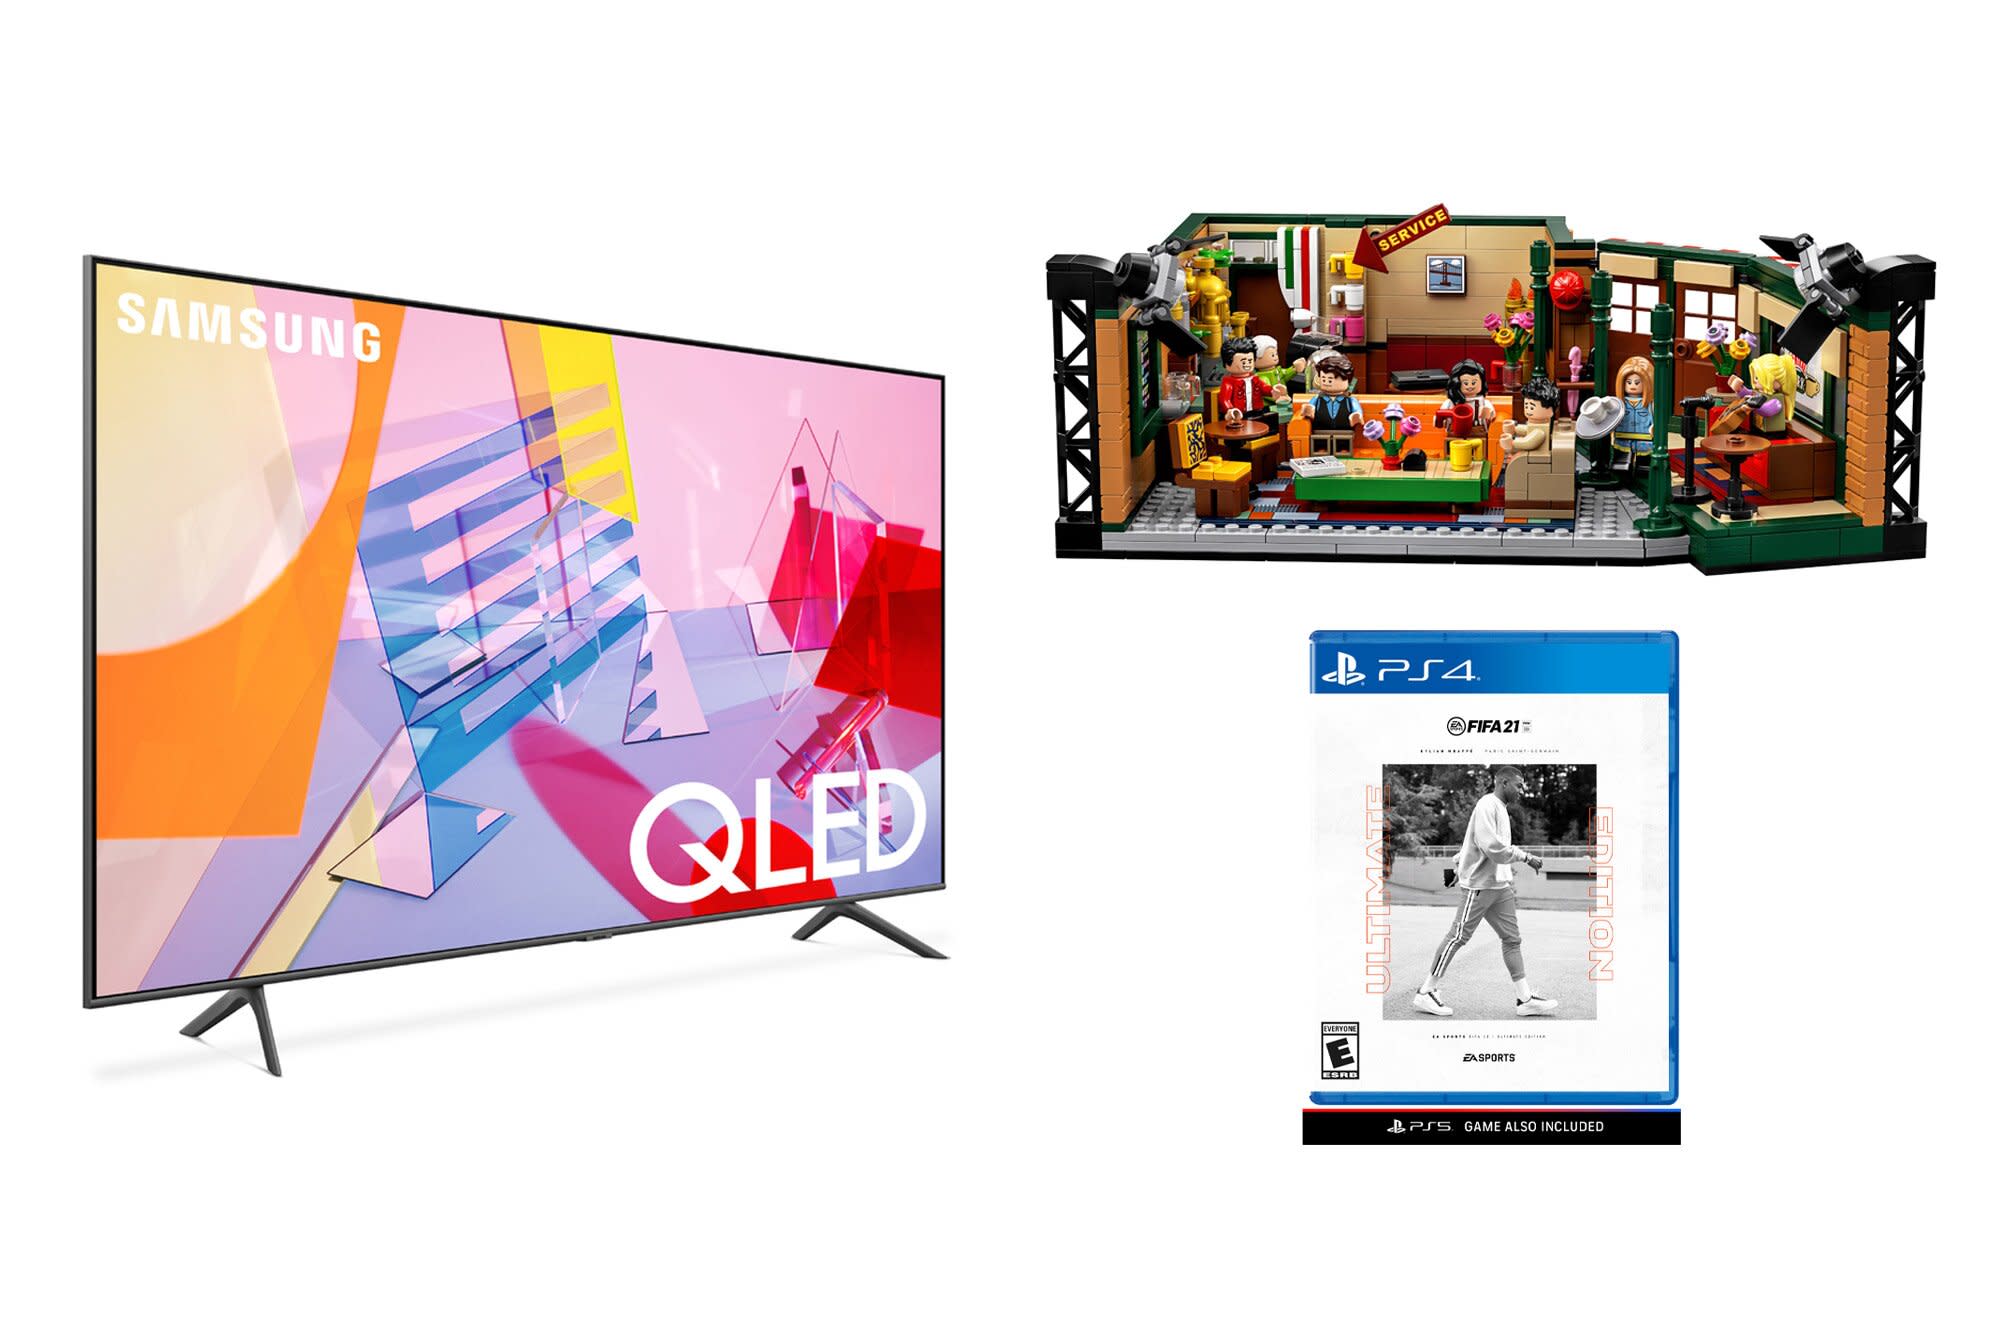 Walmart’s early Black Friday deals: Smart TVs, video games, and more are on sale